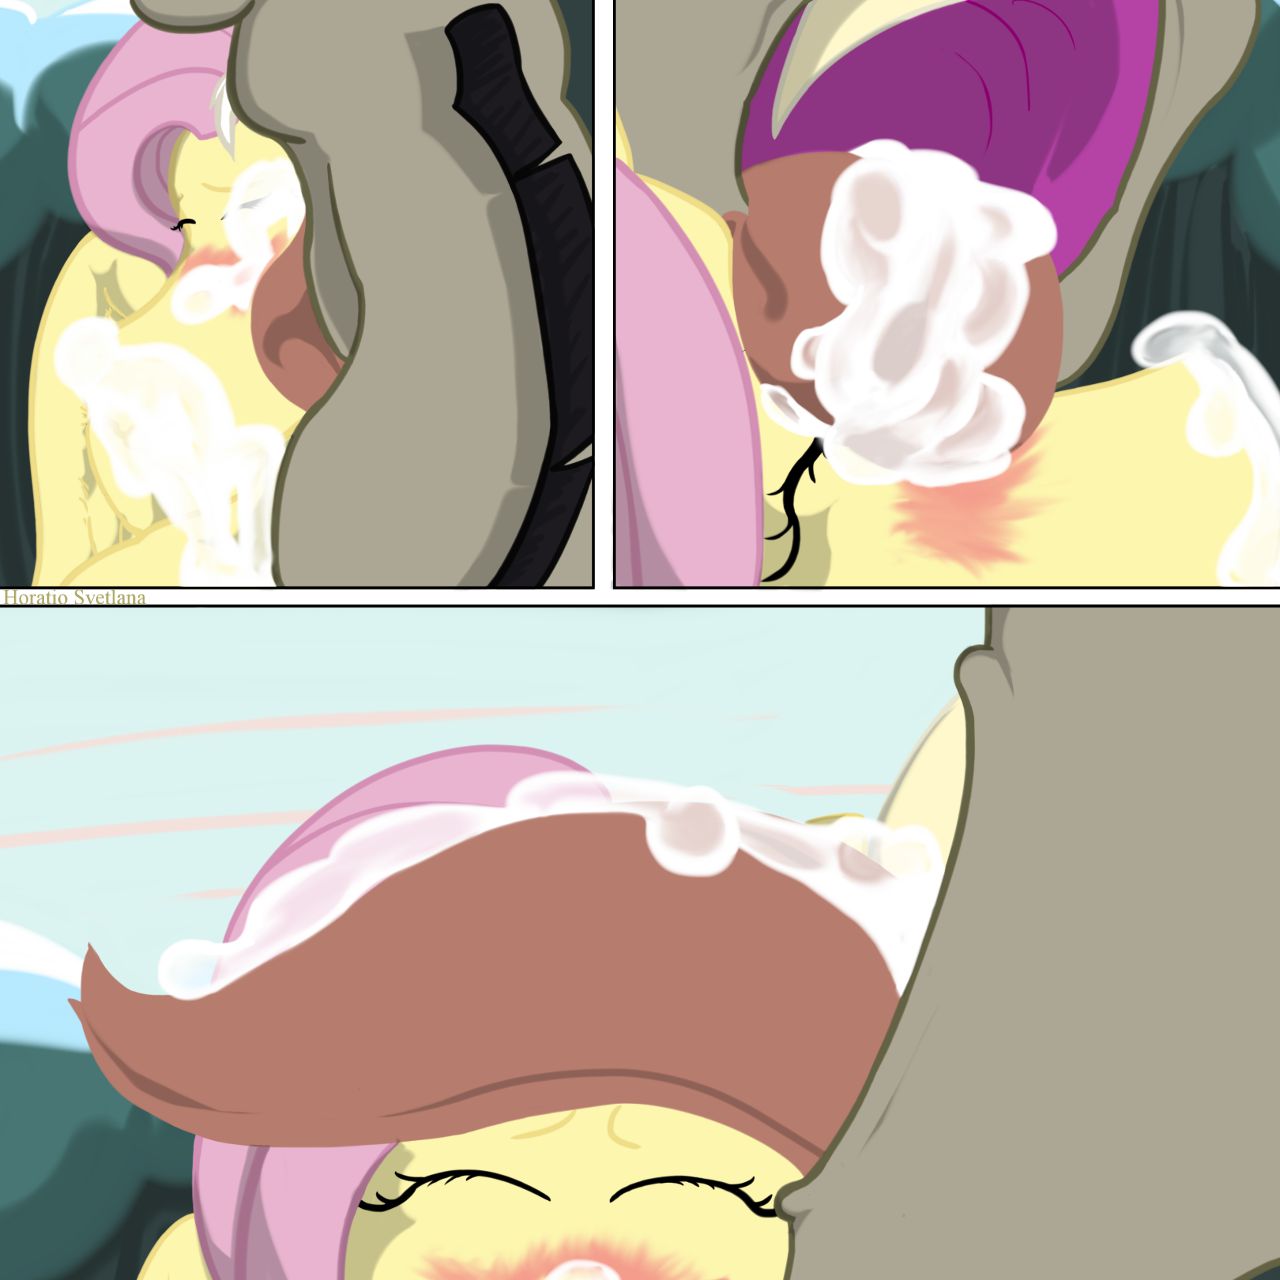 [Horatio Svetlana] Fluttershy's Discord Day (My Little Pony Friendship Is Magic) [Ongoing] 12